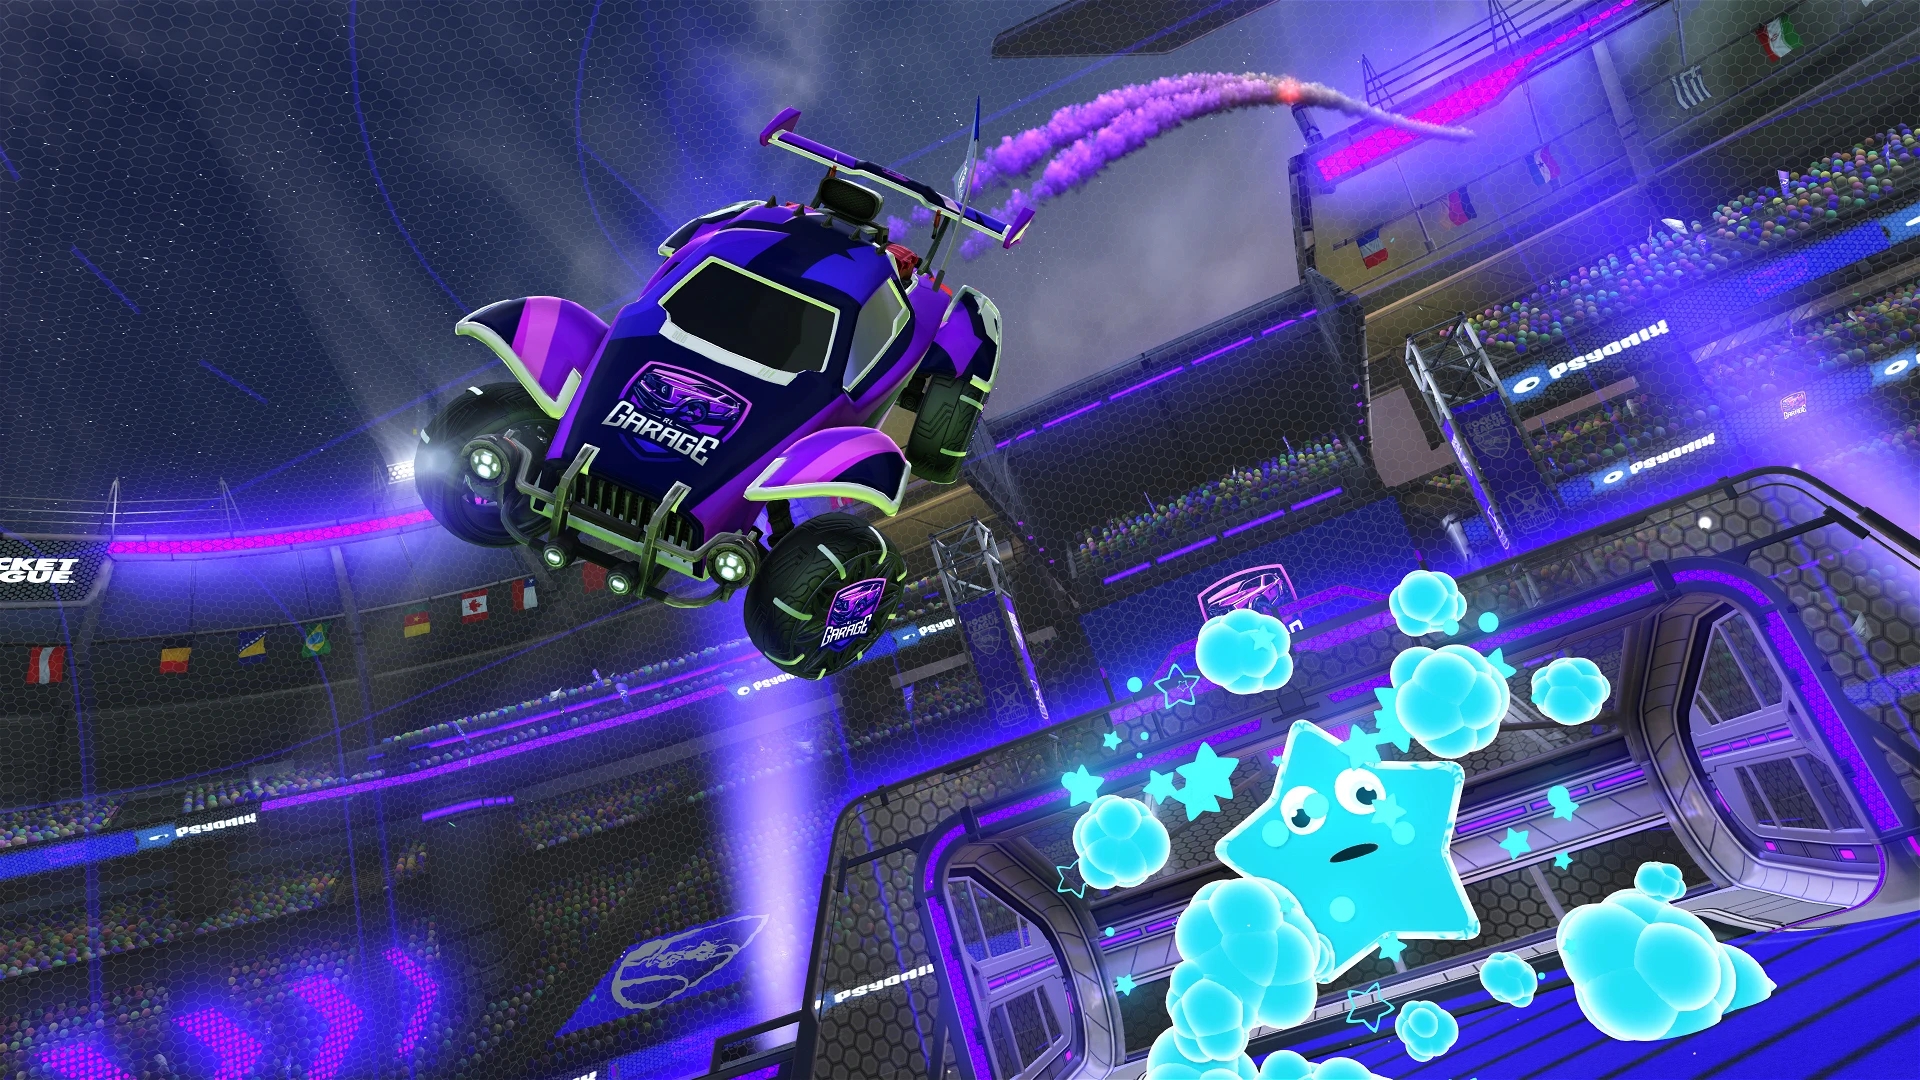 Today, we are going to be covering how to get Exotic Drops in Rocket League, as well as answer some questions like what items are exotic in Rocket League.